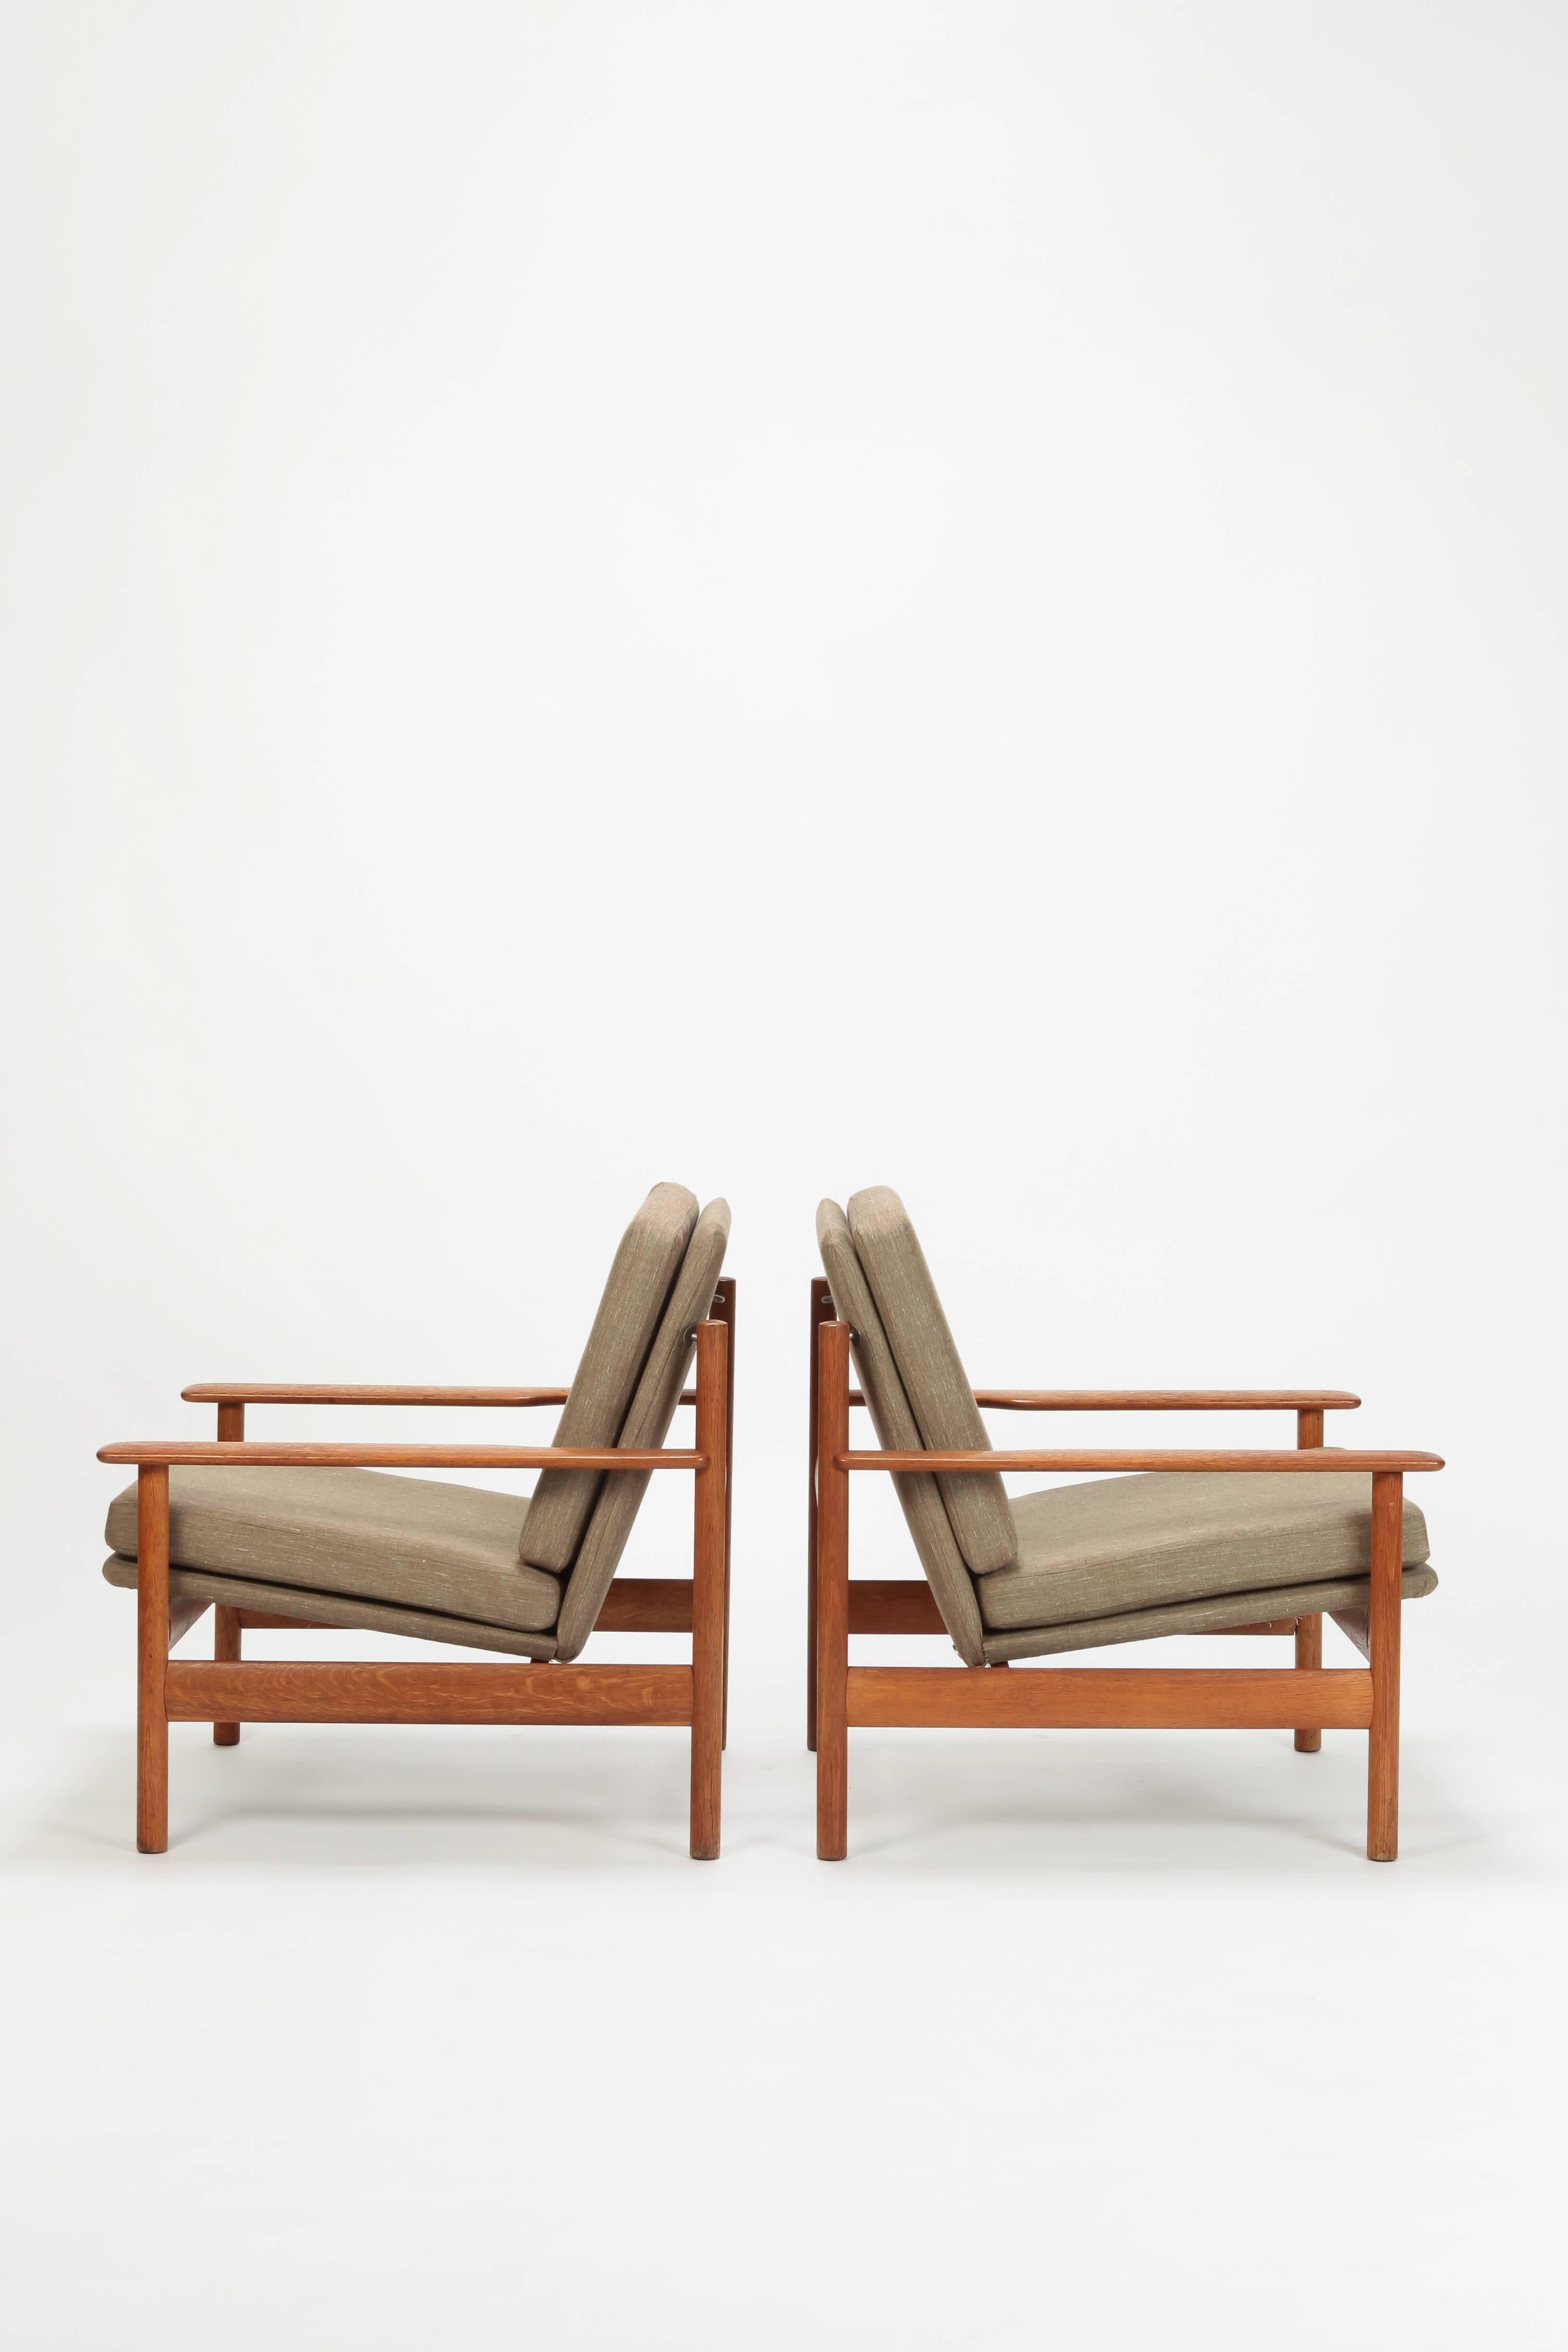 Pair of Sven Ivar Dysthe chairs manufactured by Dokka Mobler in the 1950s. Solid oak frame. Newly upholstered with linen. Classically sleek design combined with pure comfort. The generously sized armrests and the swinging seat invite you to stay a